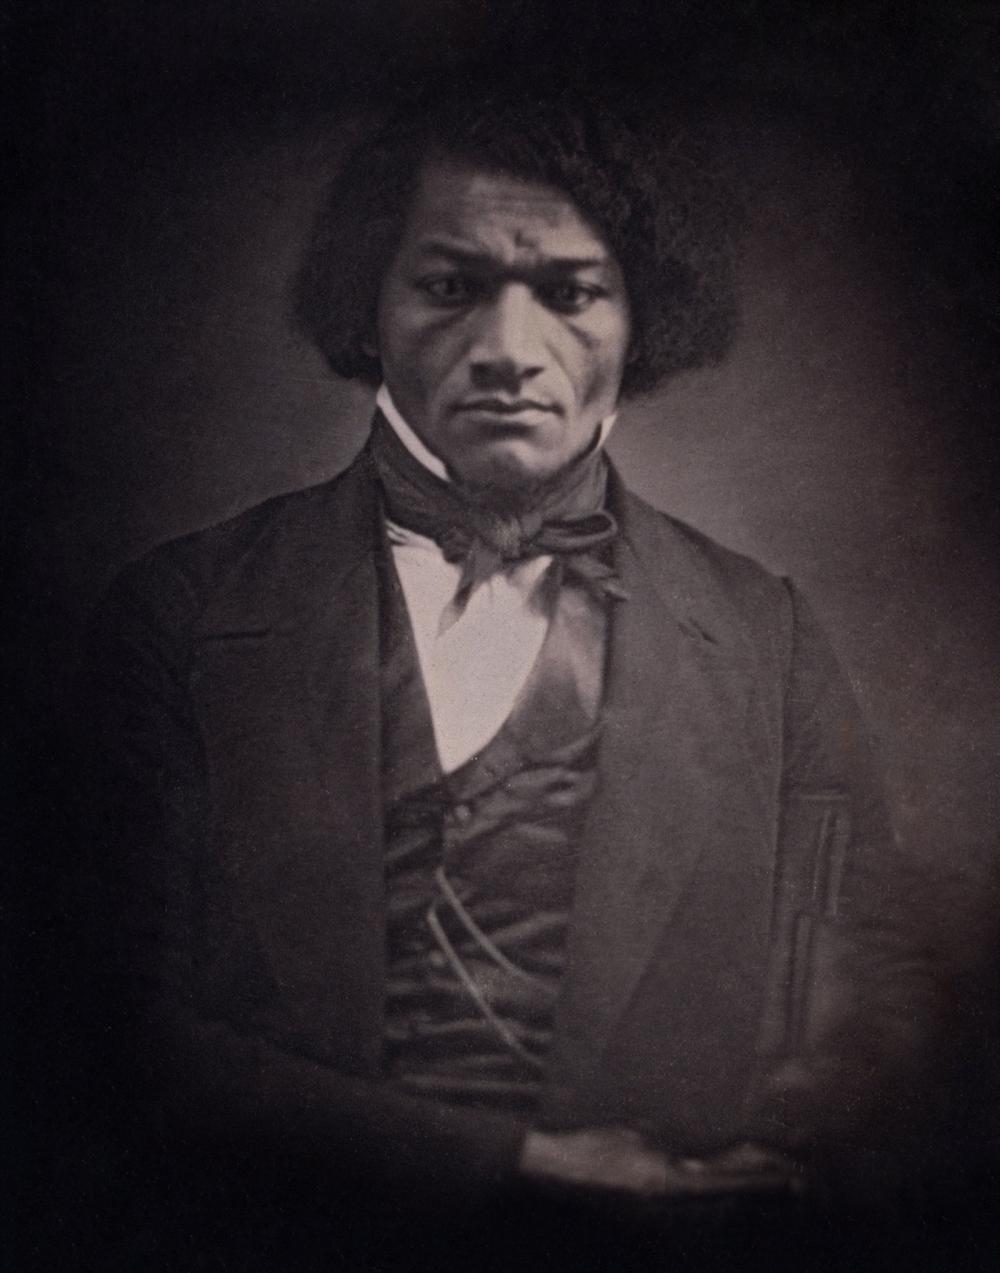 Frederick Douglass was perhaps the most famous African American abolitionist, fighting tirelessly not only for the end of slavery but for equal rights of all American citizens.